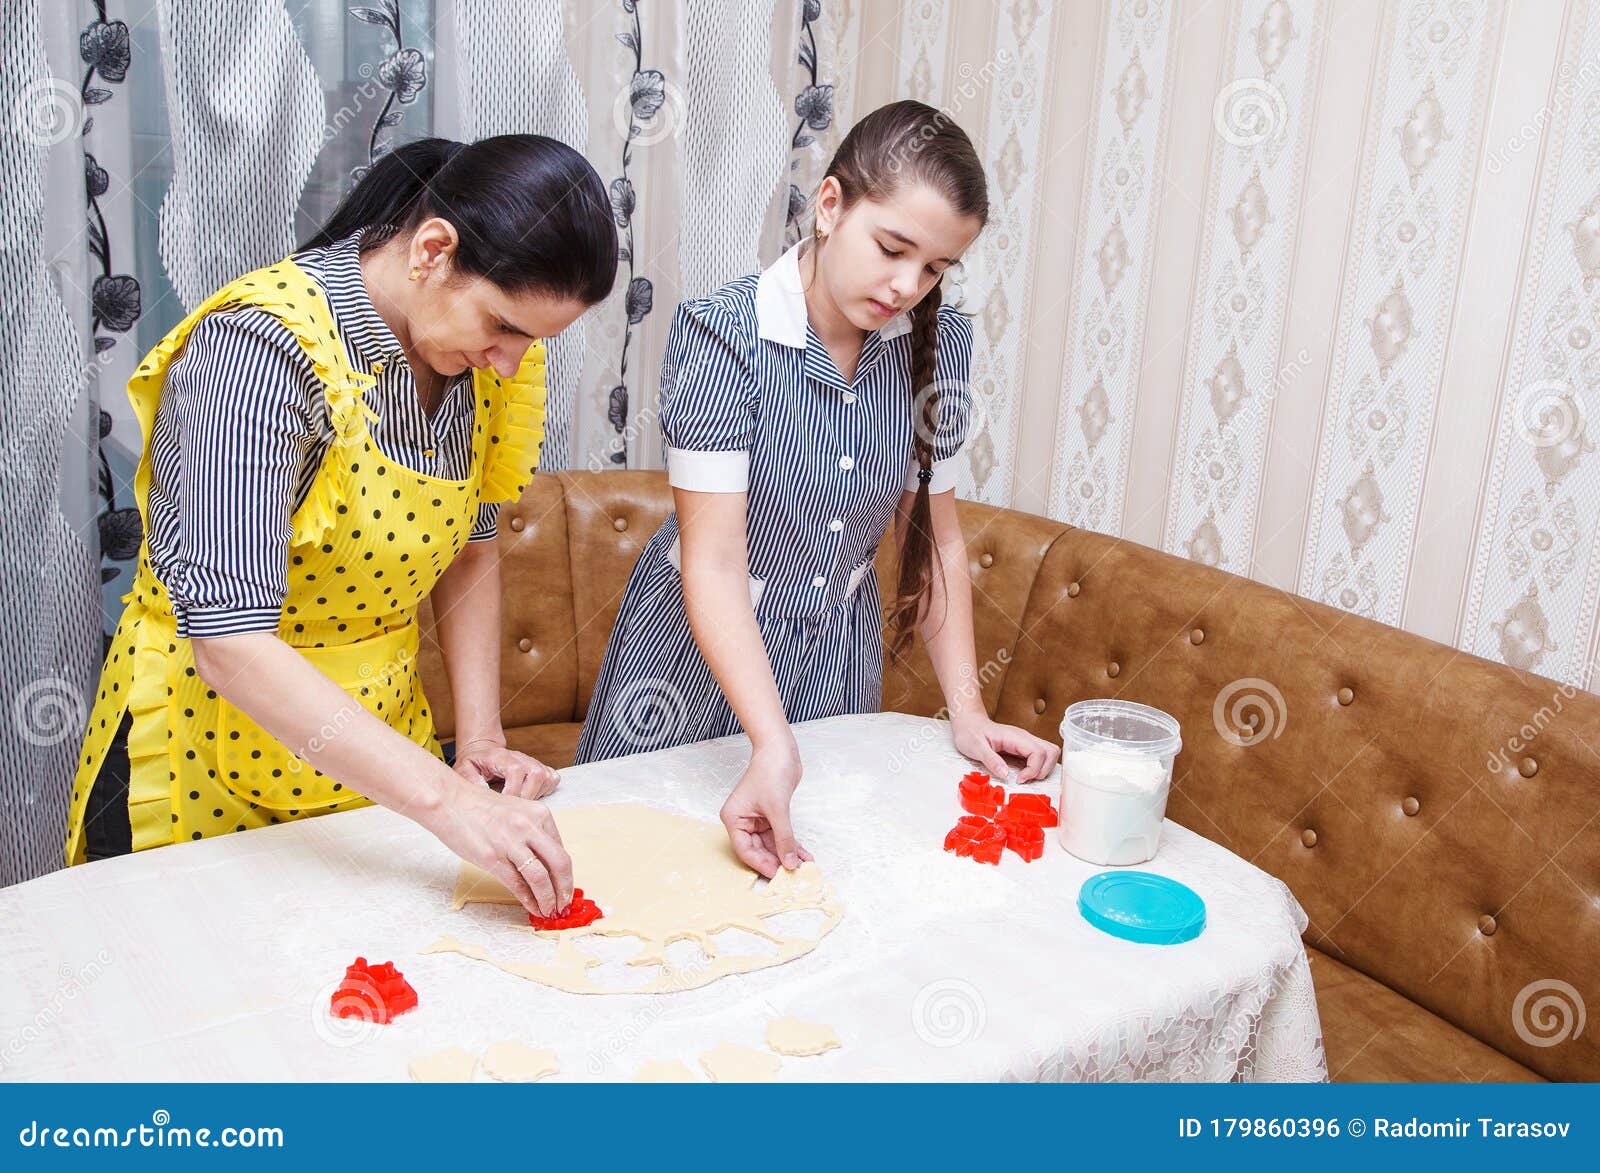 Mom and Daughter Bake Homemade Cookies Stock Photo Image of food